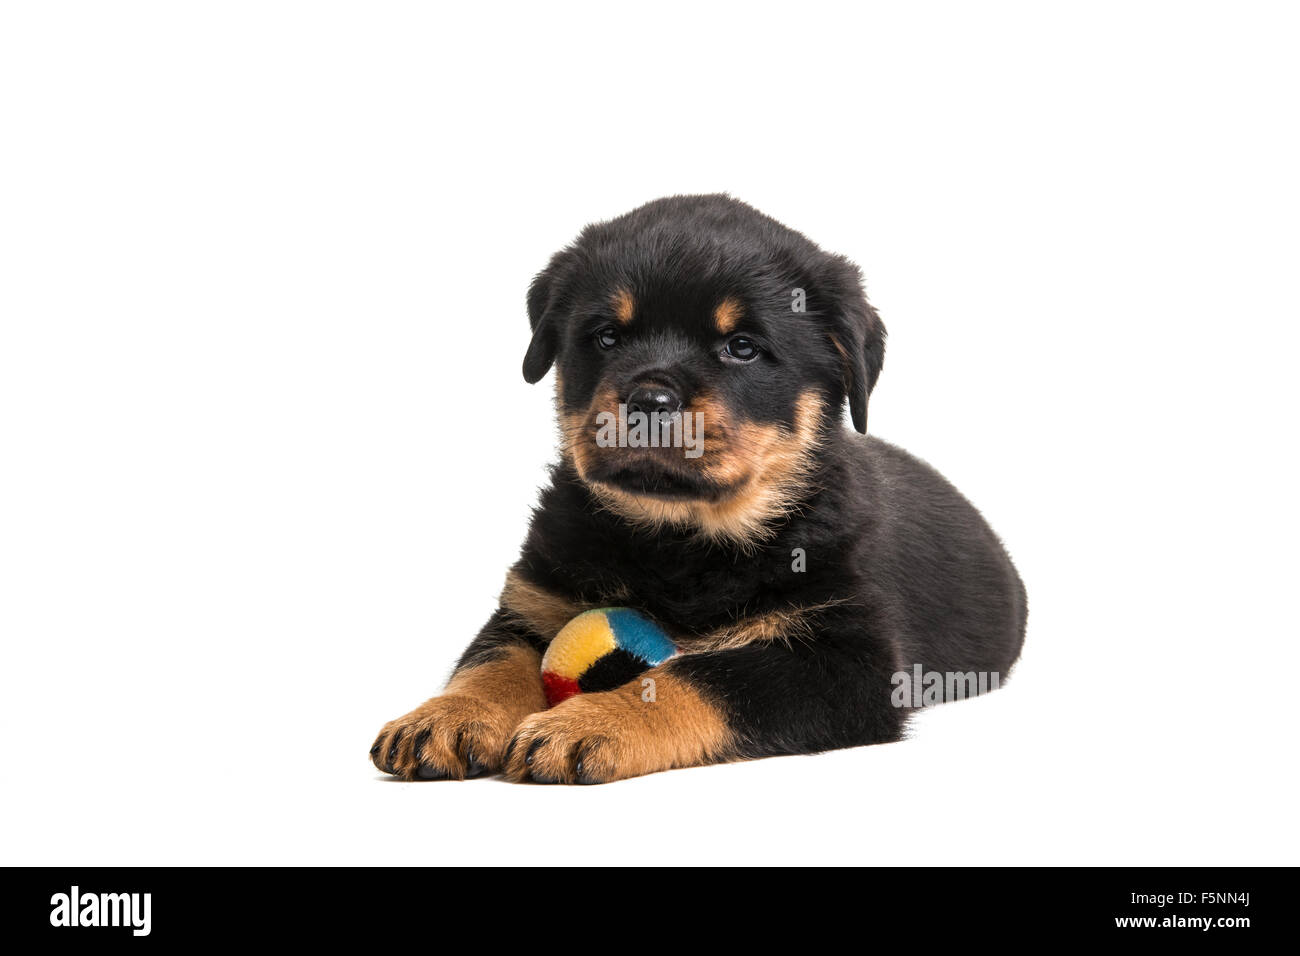 Cute rottweiler puppy with ball lying down Stock Photo